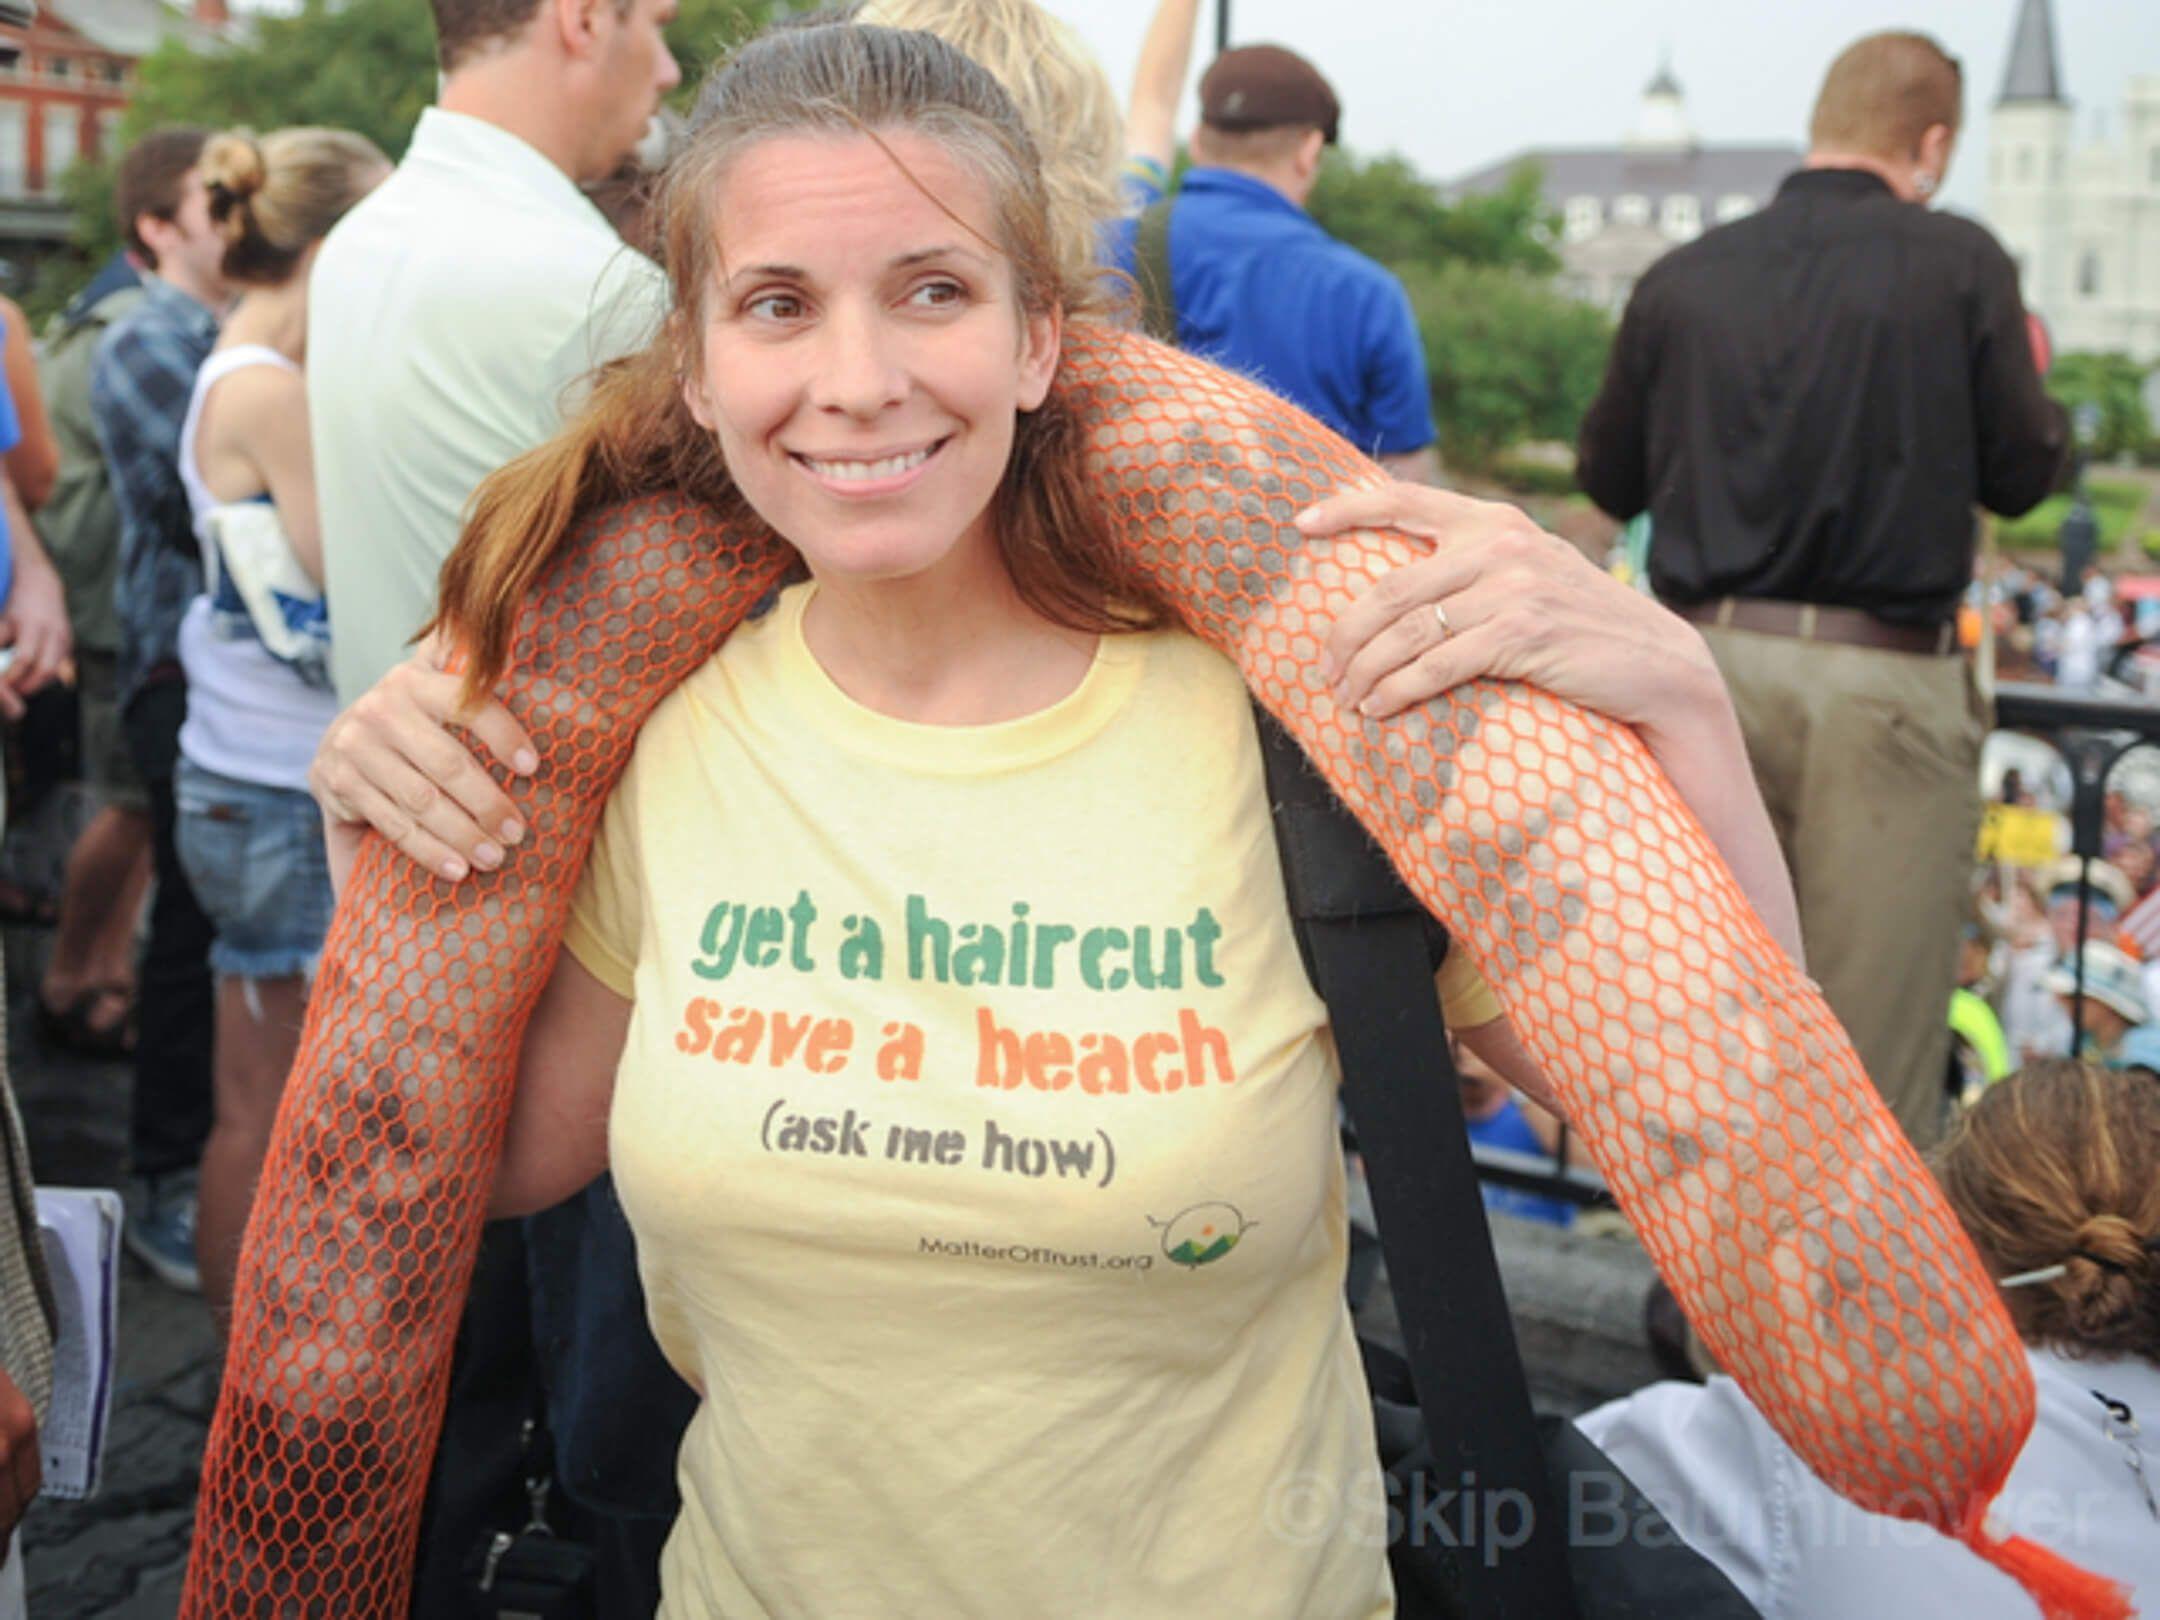 Lisa Gautier has a goal to use one of nature’s most underused resources: hair. Photographer: matteroftrust.org